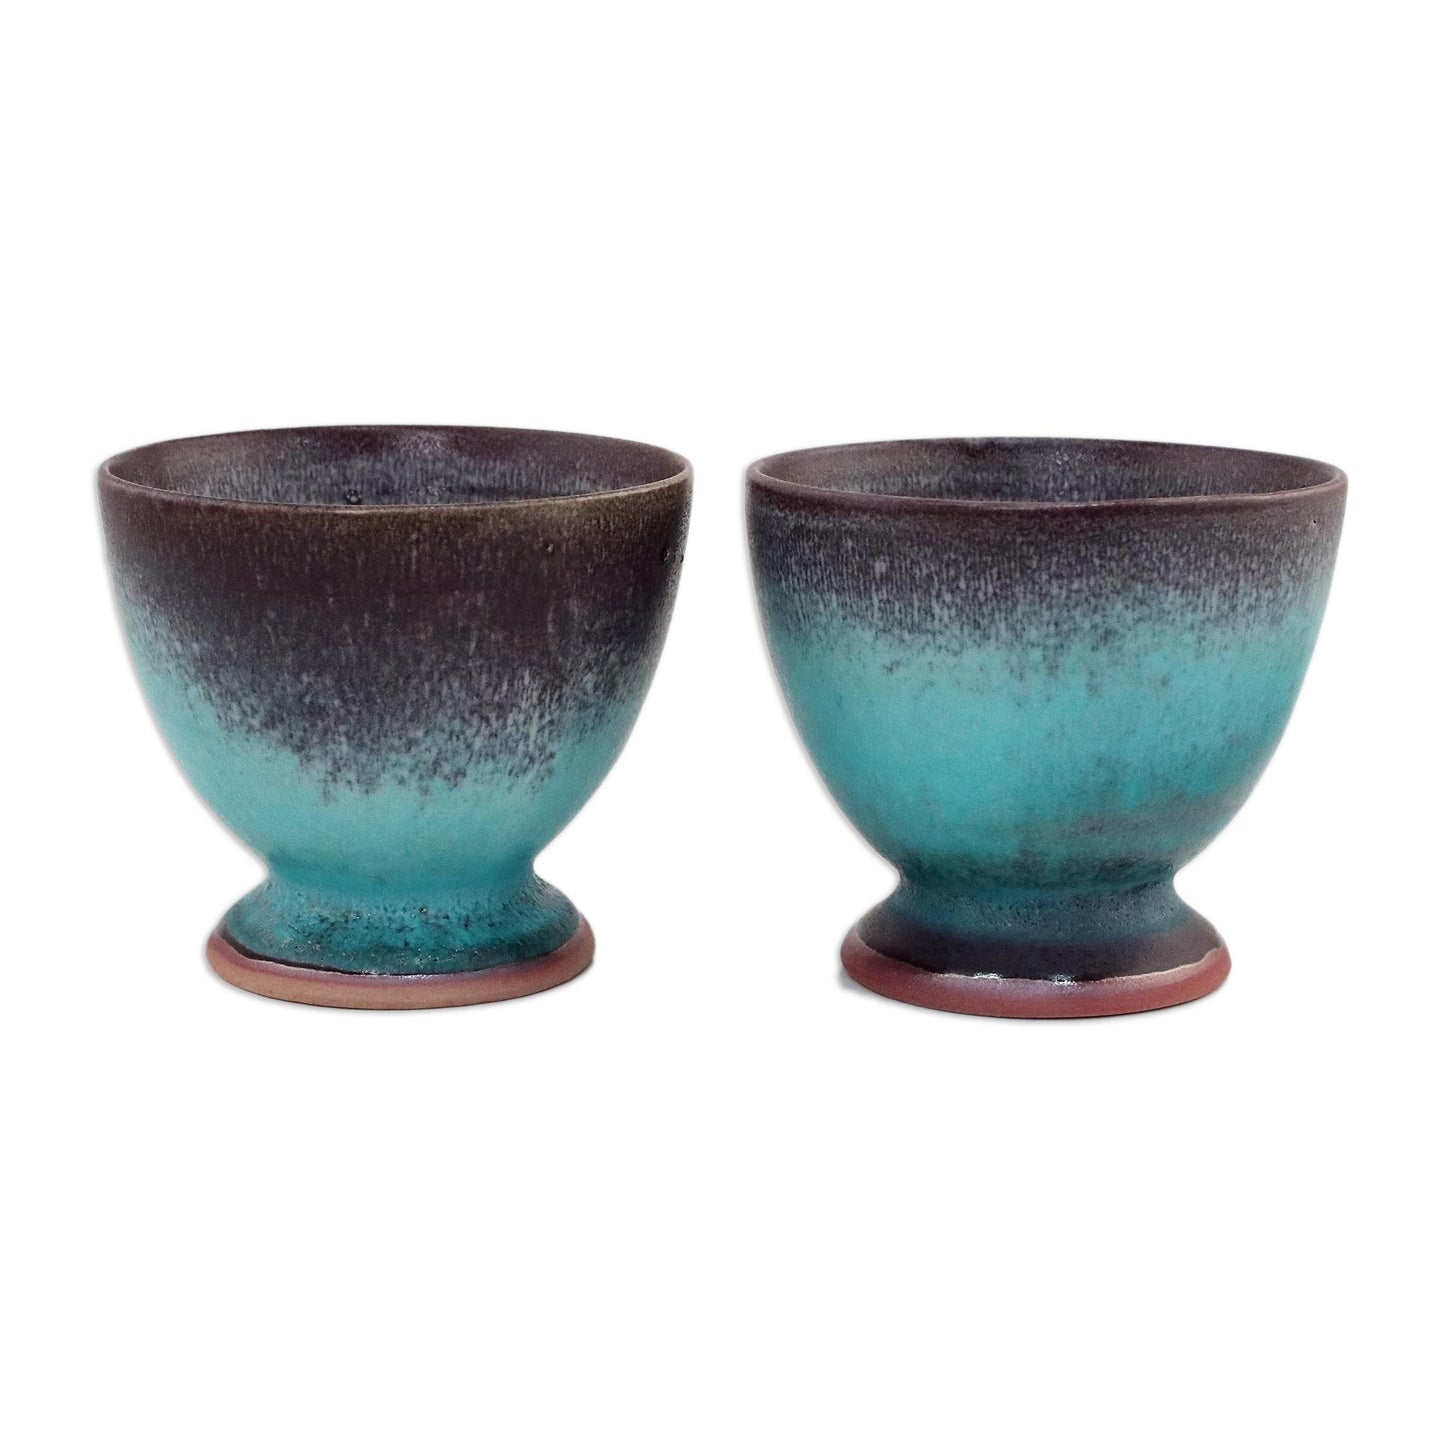 Serene Seas Turquoise and Brown Footed Ceramic Teacups (Pair)